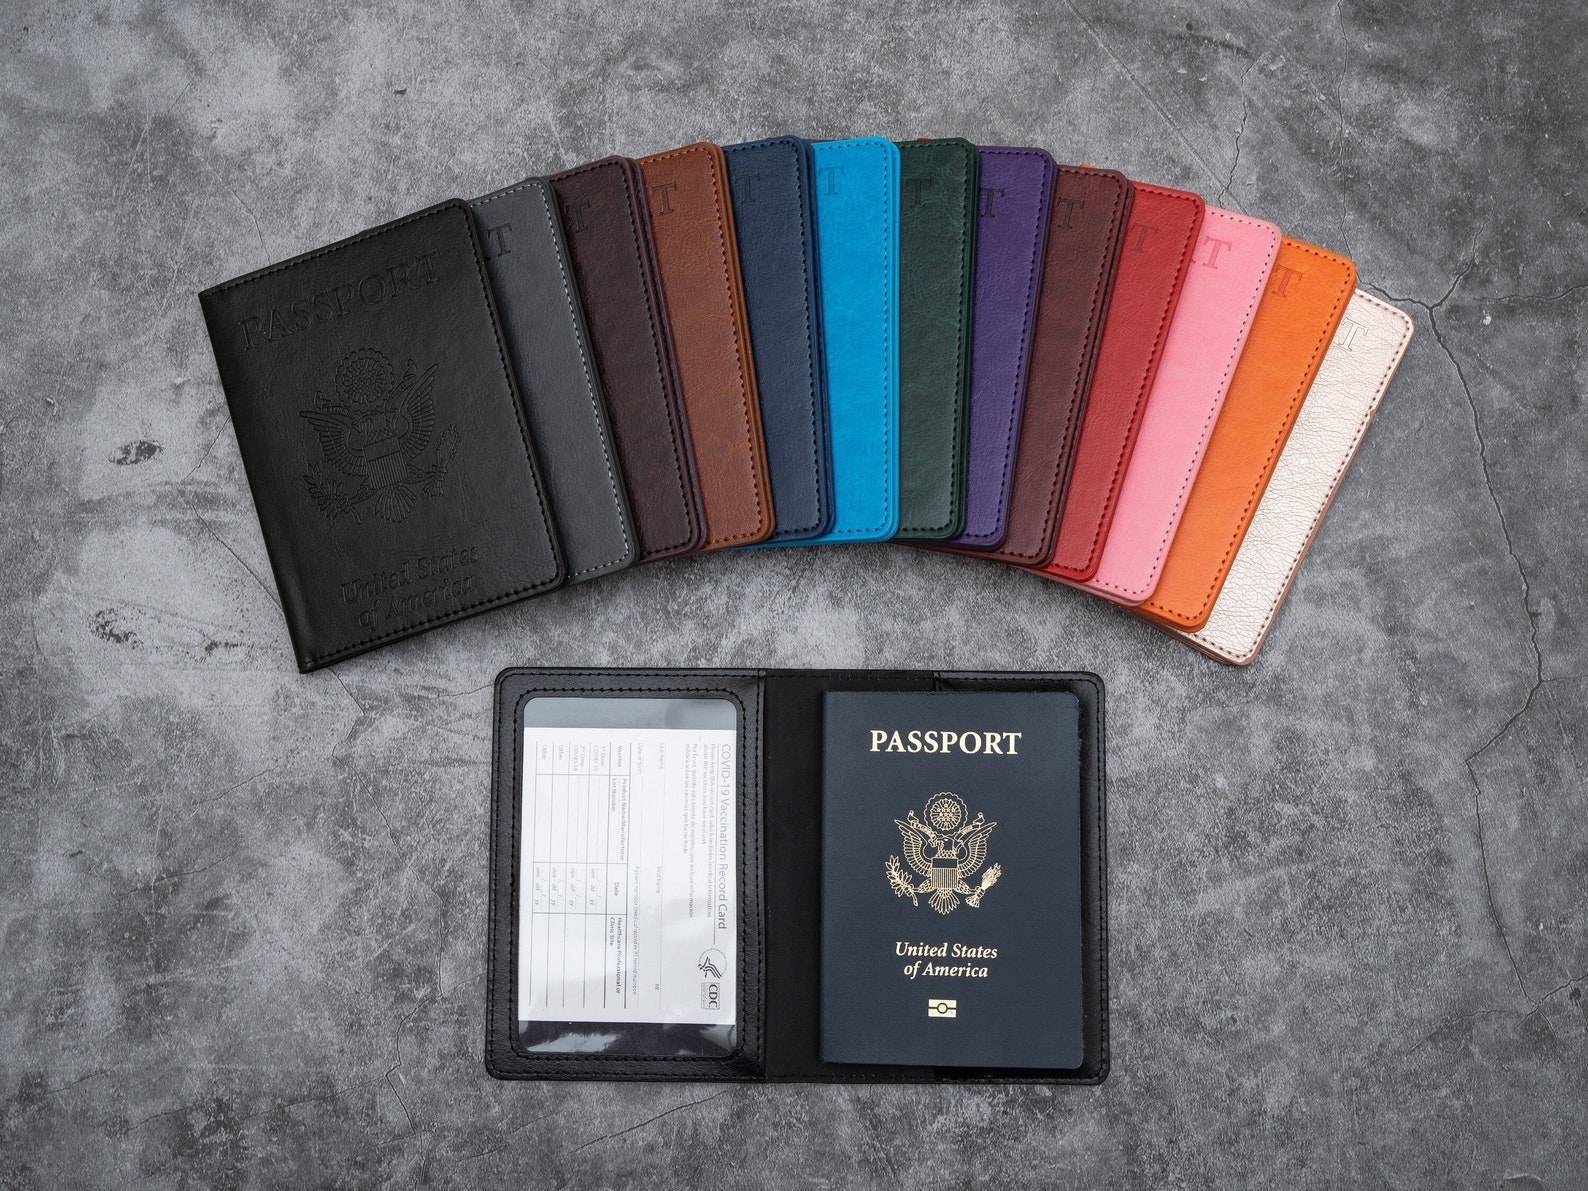 The passport and vaccination card holders in various colors